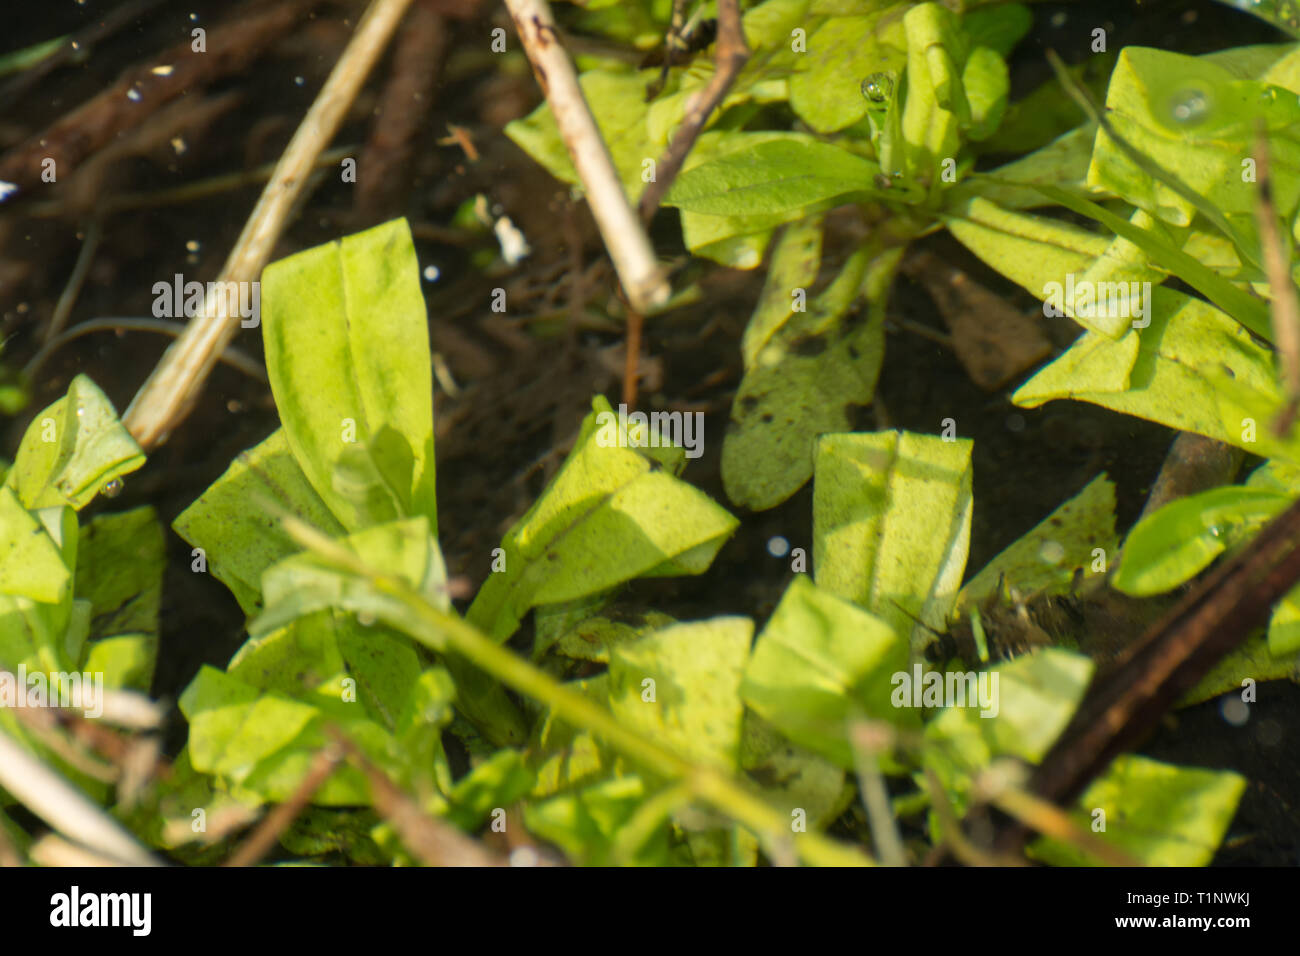 Pond plants with leaves folded over by female great crested newts (Triturus cristatus) to protect their eggs in a breeding pond during March, UK Stock Photo